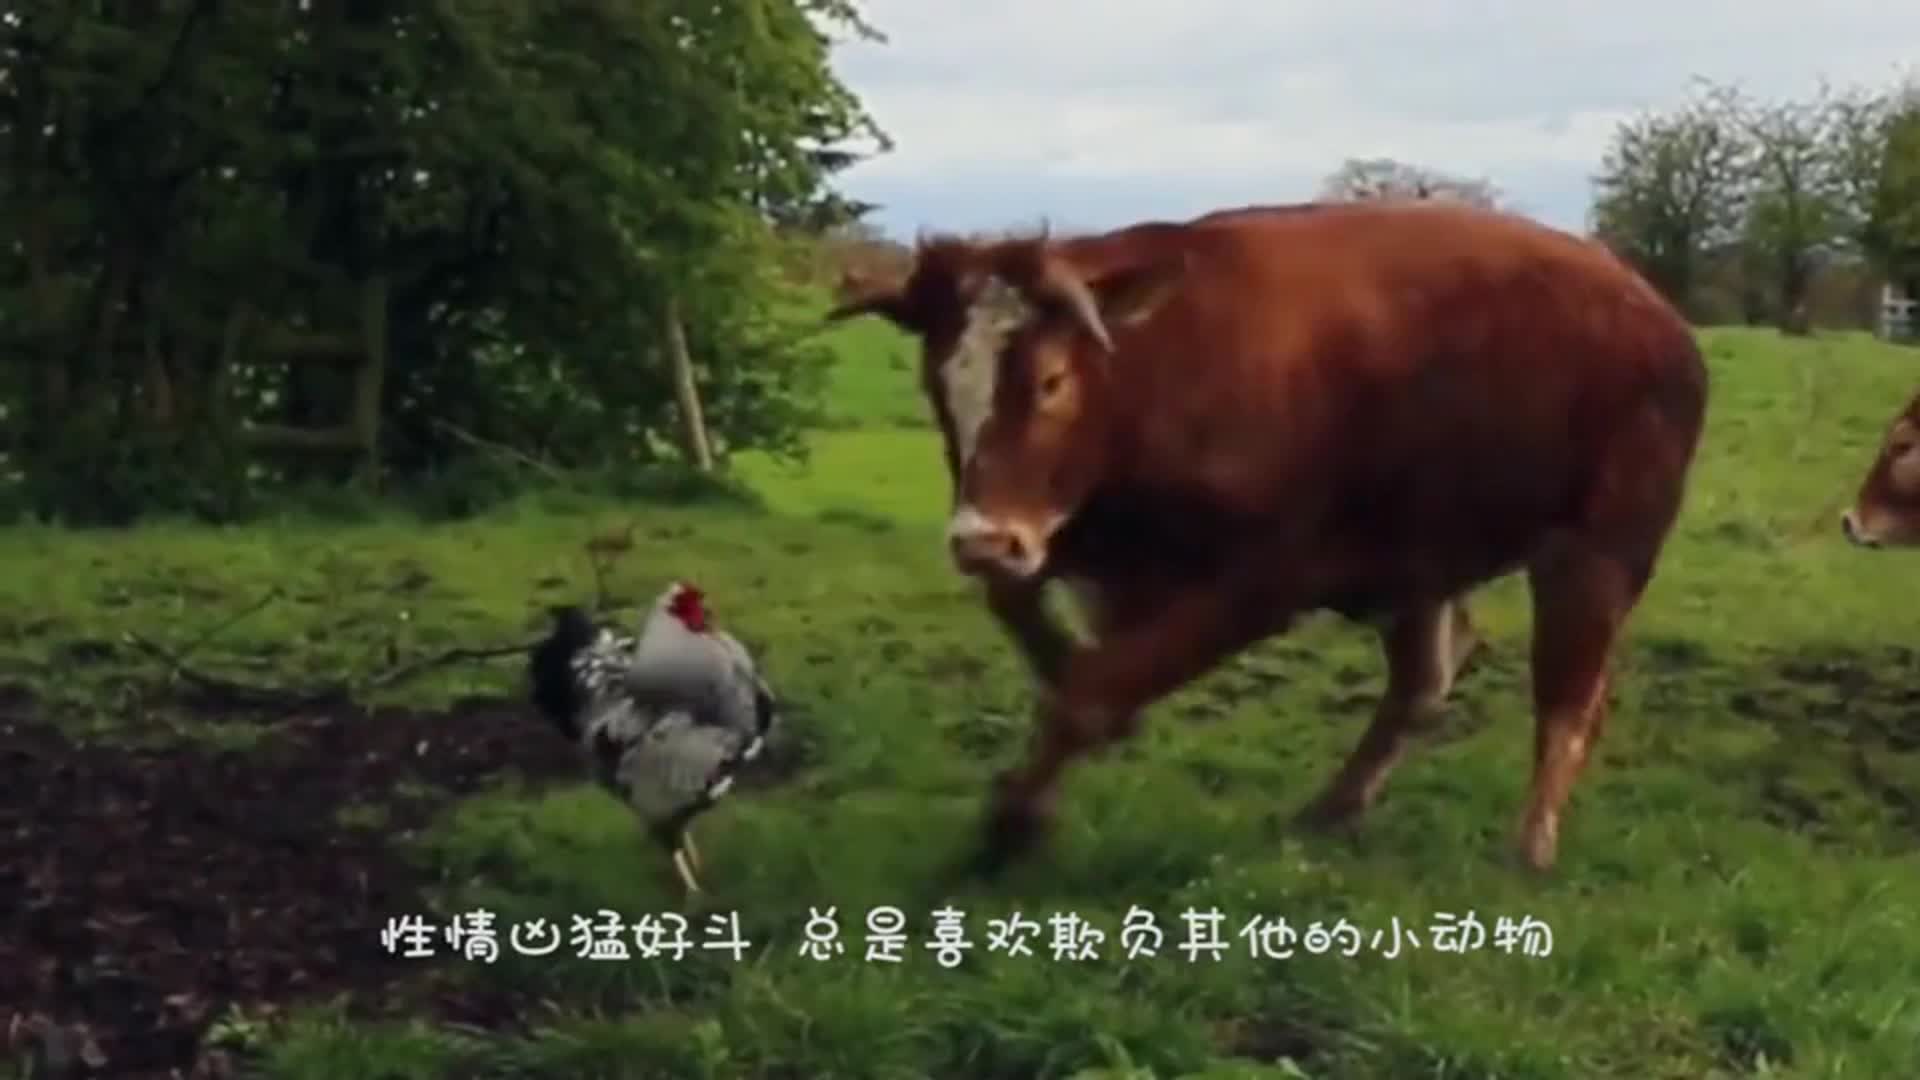 A 300-kilogram horse fell to the ground frightened by a chicken. The camera captured a funny scene.